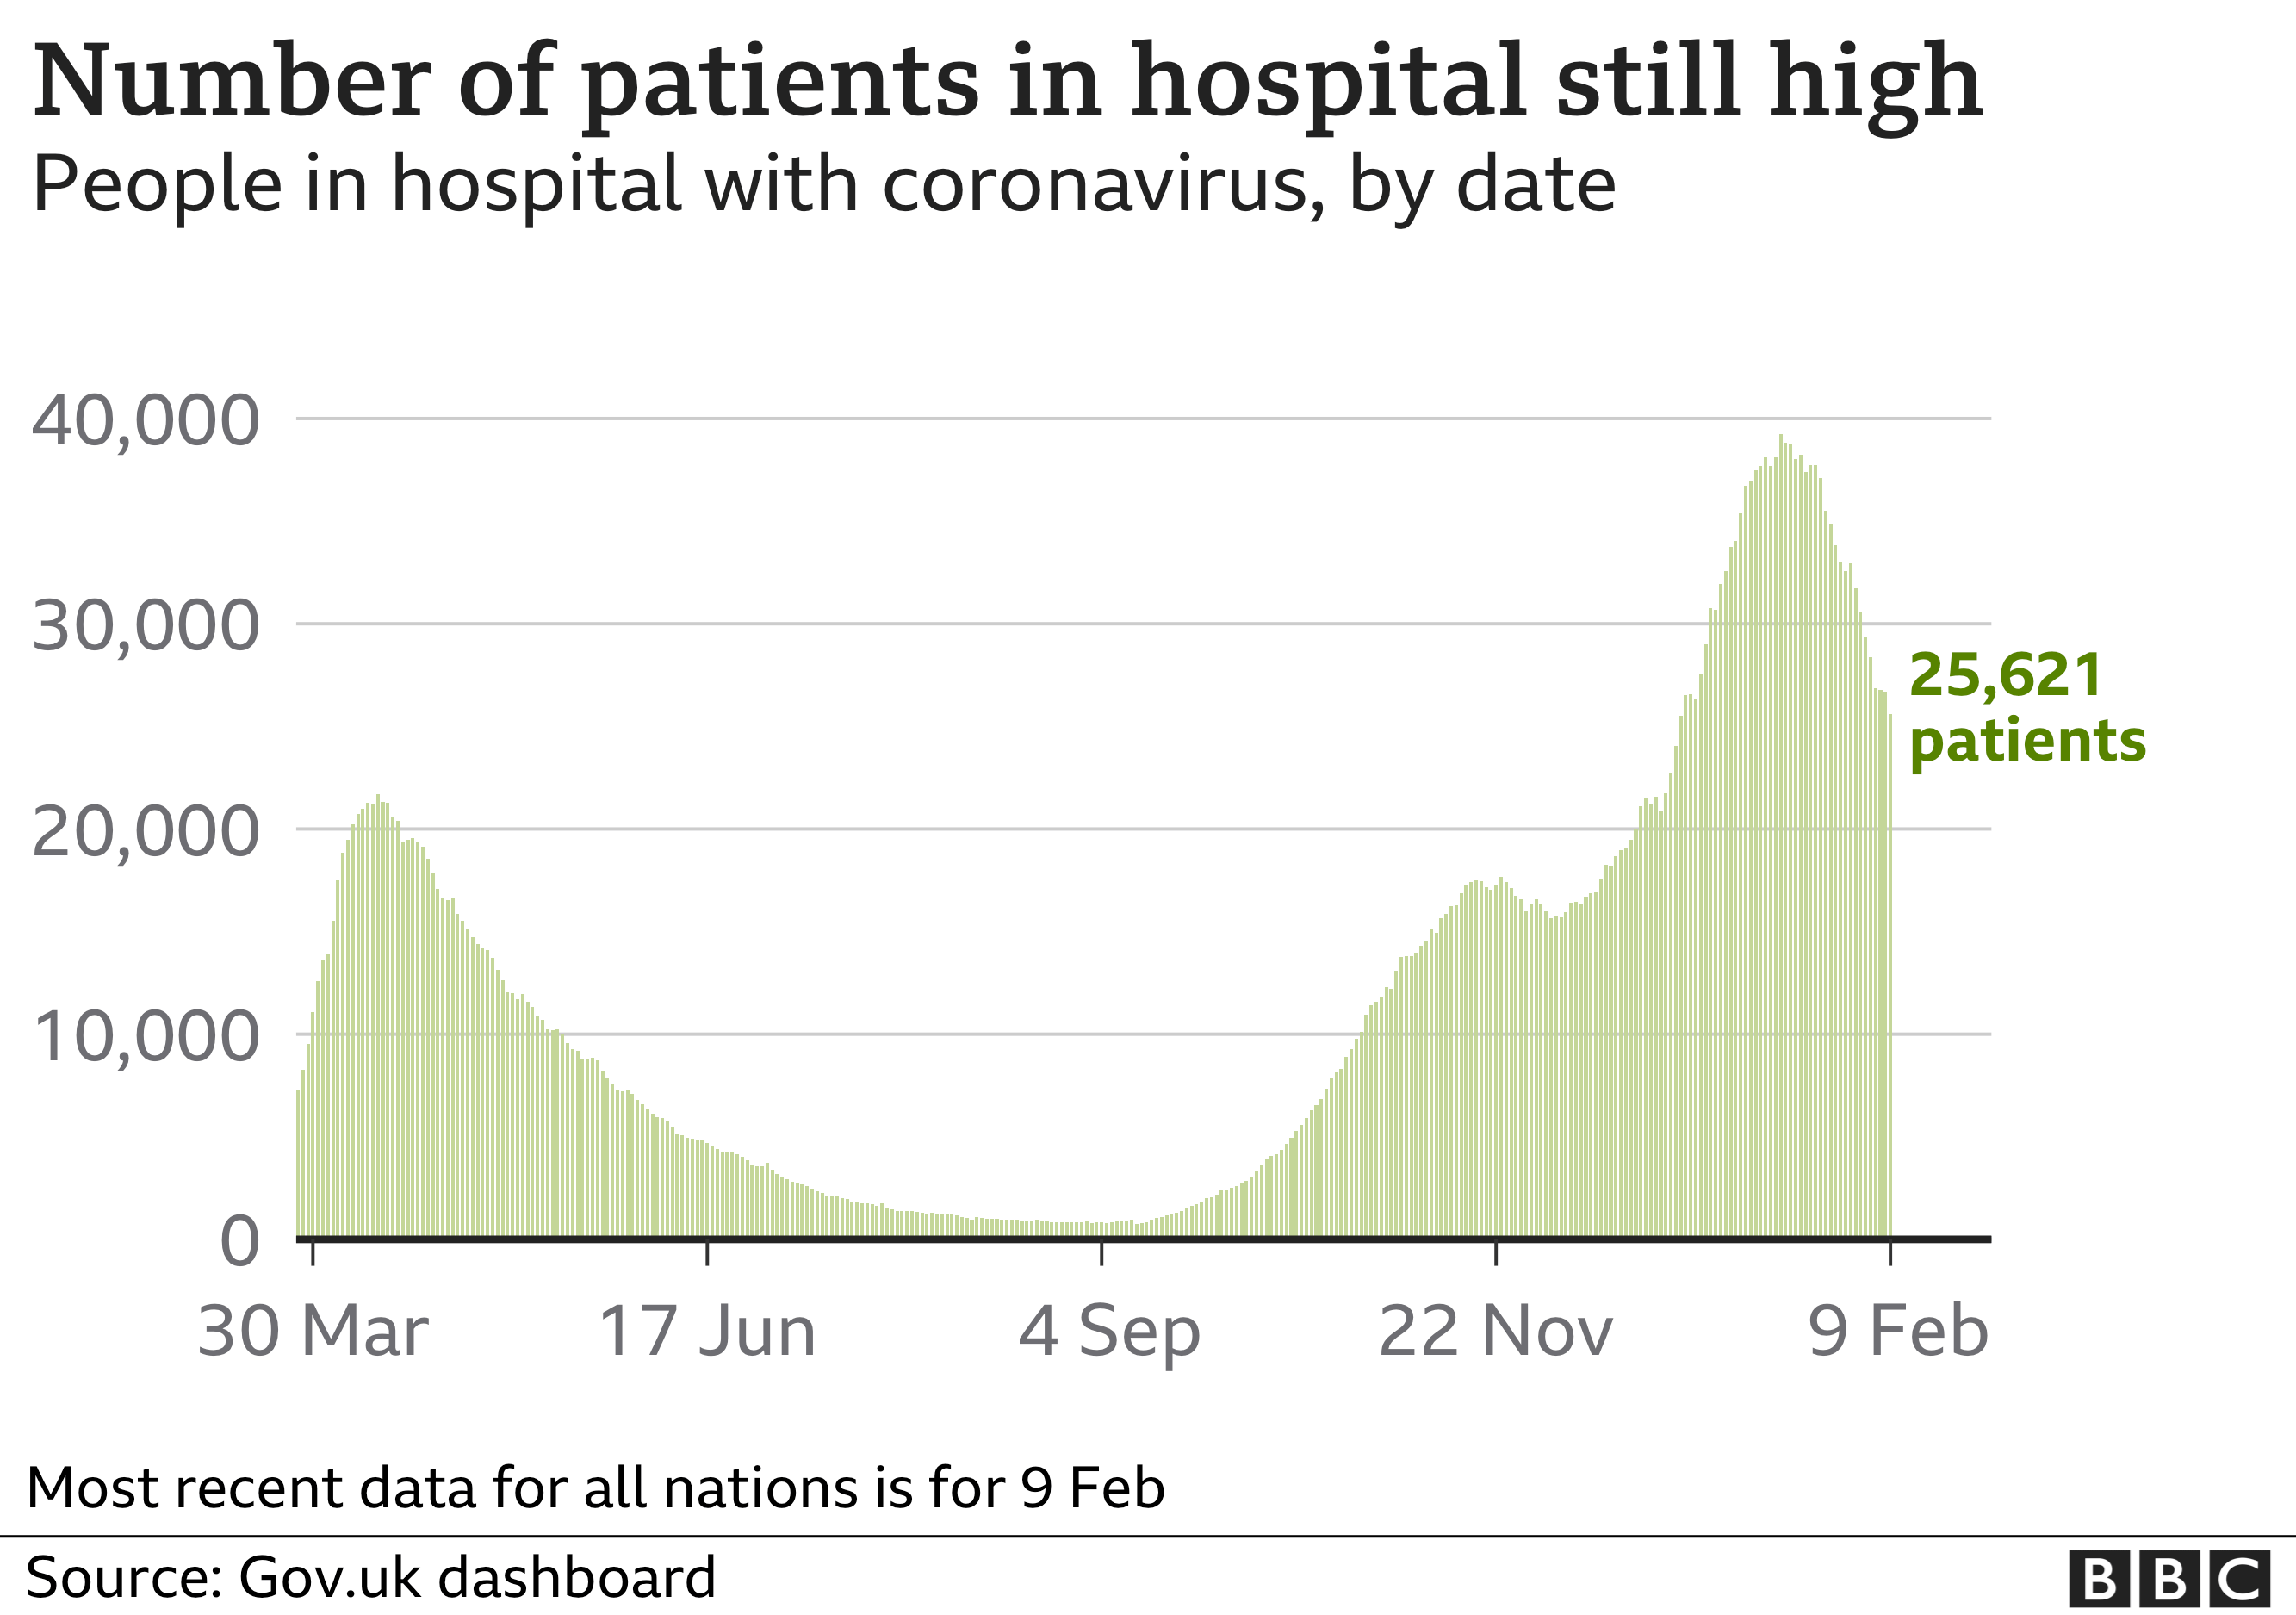 Chart showing the number of patients in hospital is still high